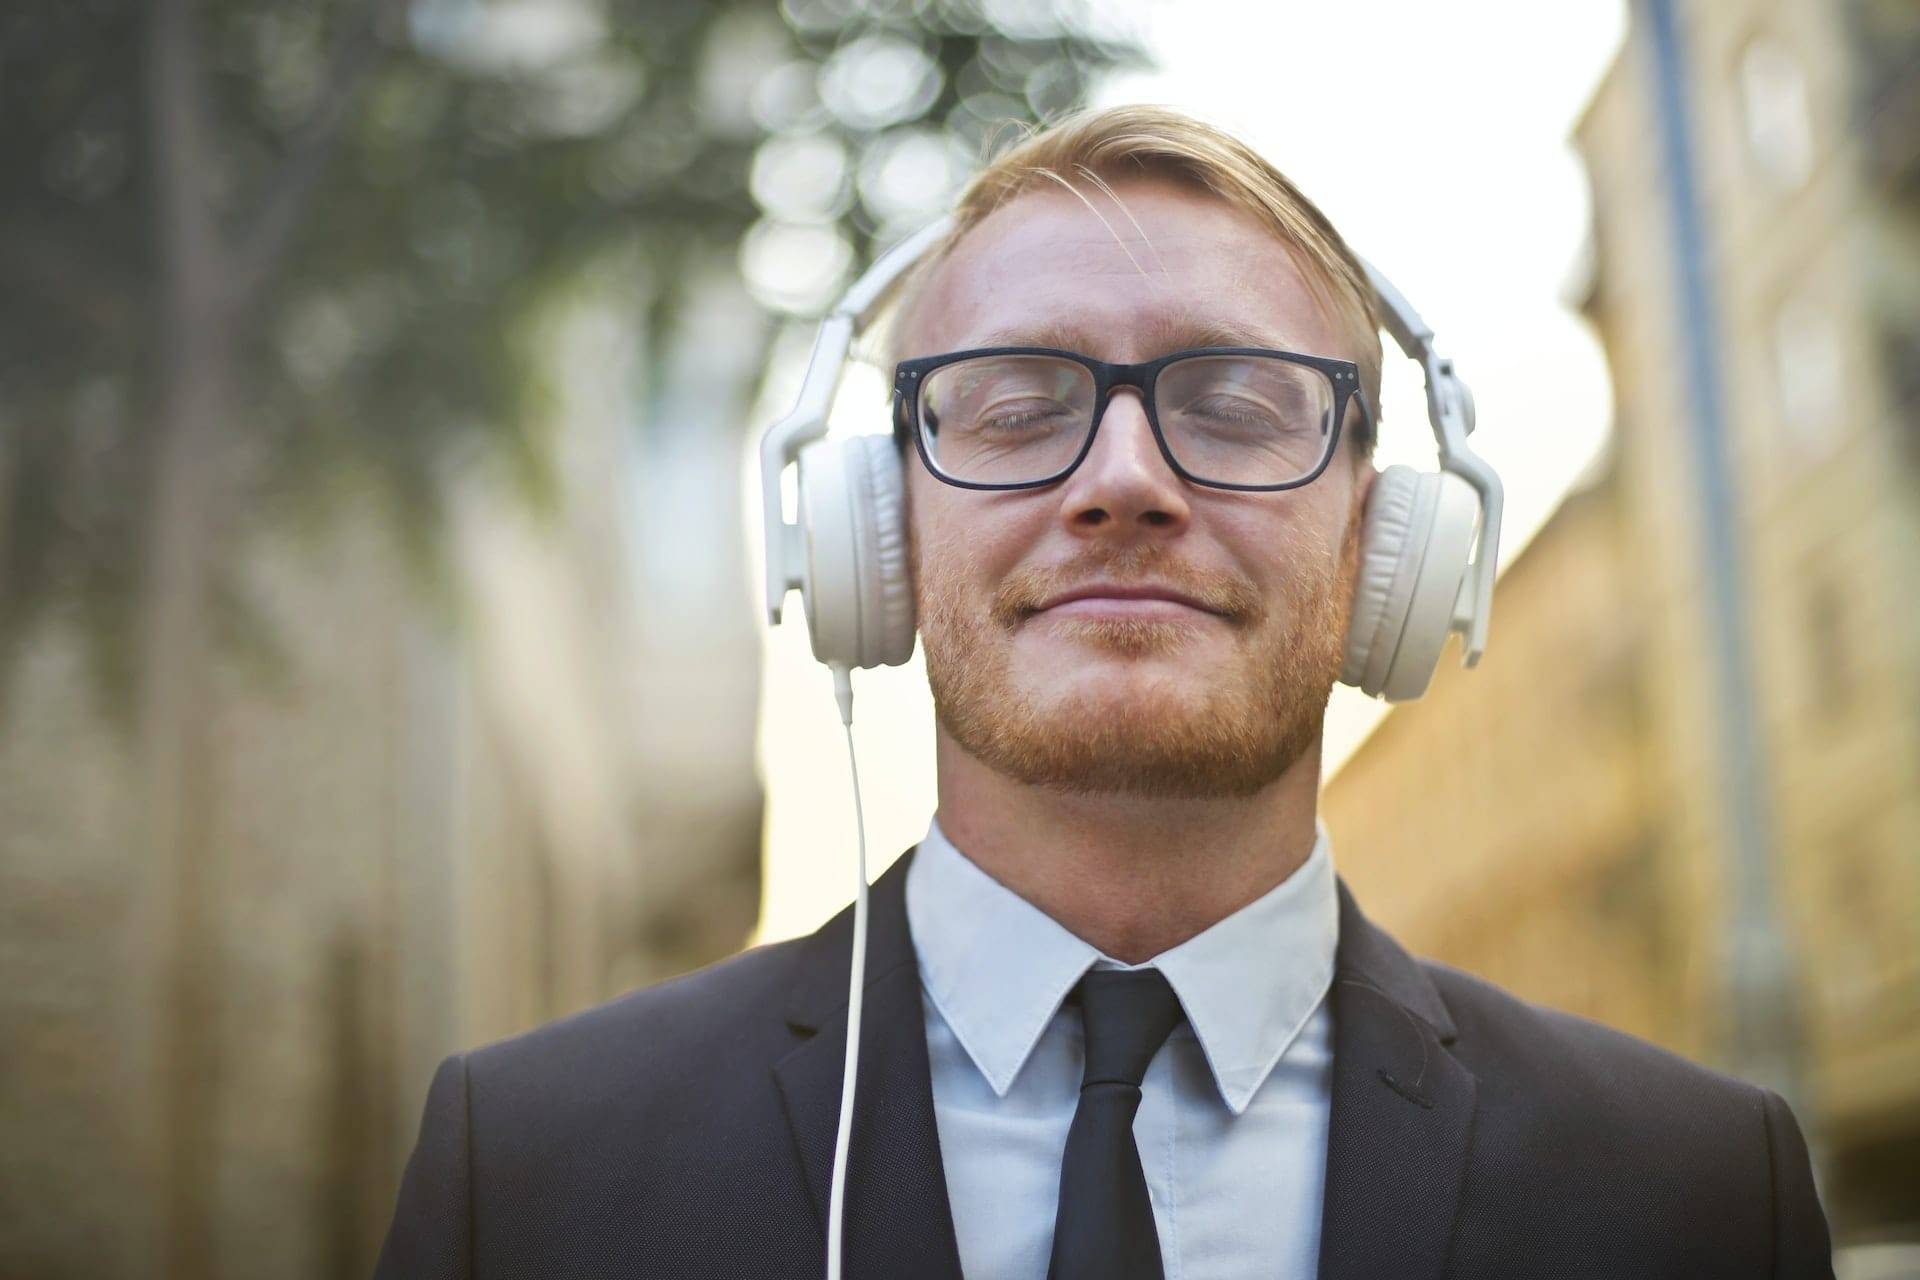 Is Listening to Music a Good Way to Relax?